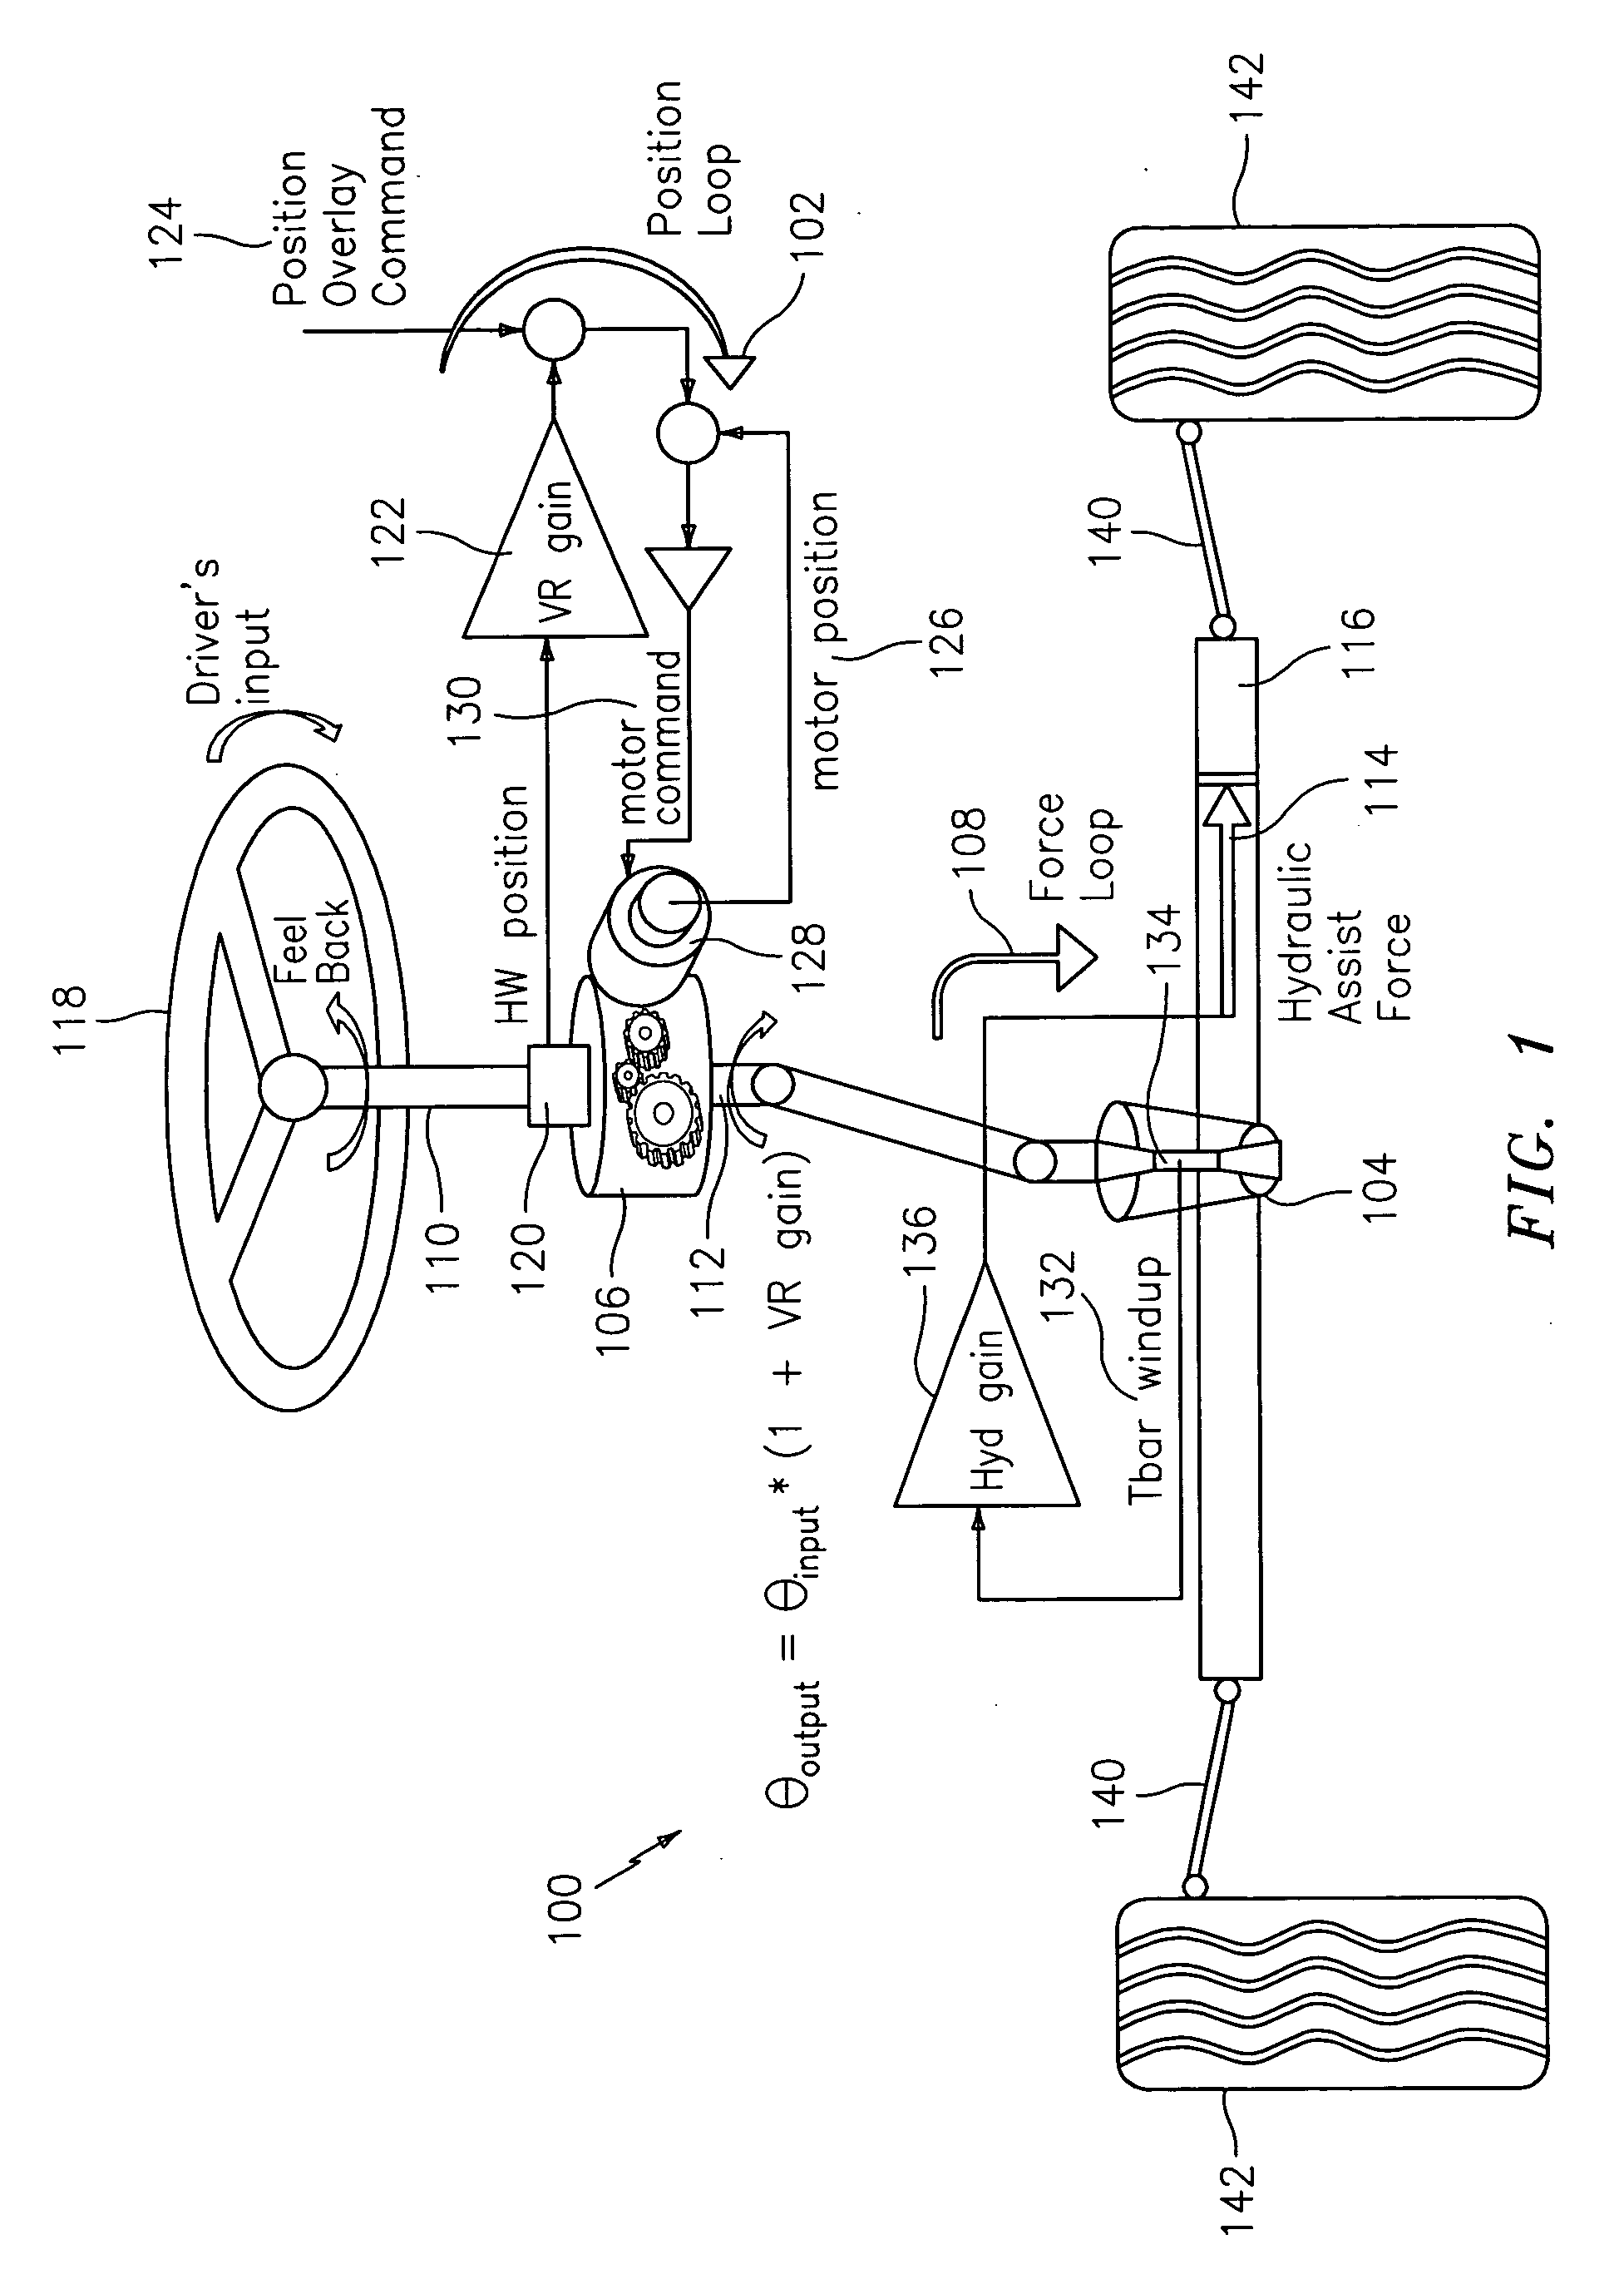 Force and position control for active front steering